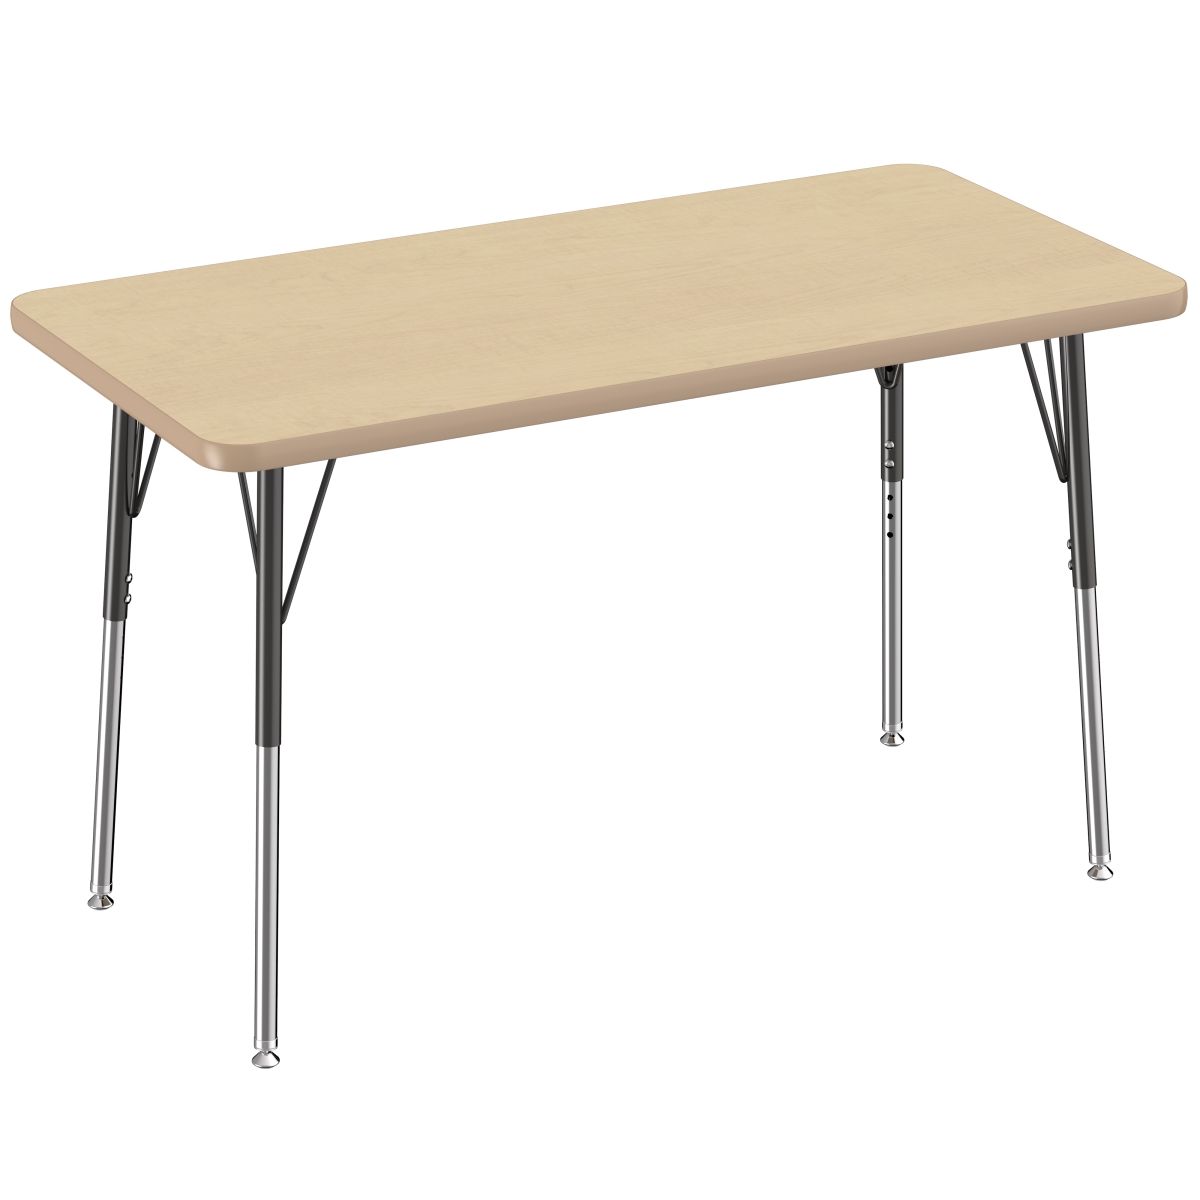 10007-mpmp 24 X 48 In. Rectangle T-mold Adjustable Activity Table With Standard Swivel - Maple